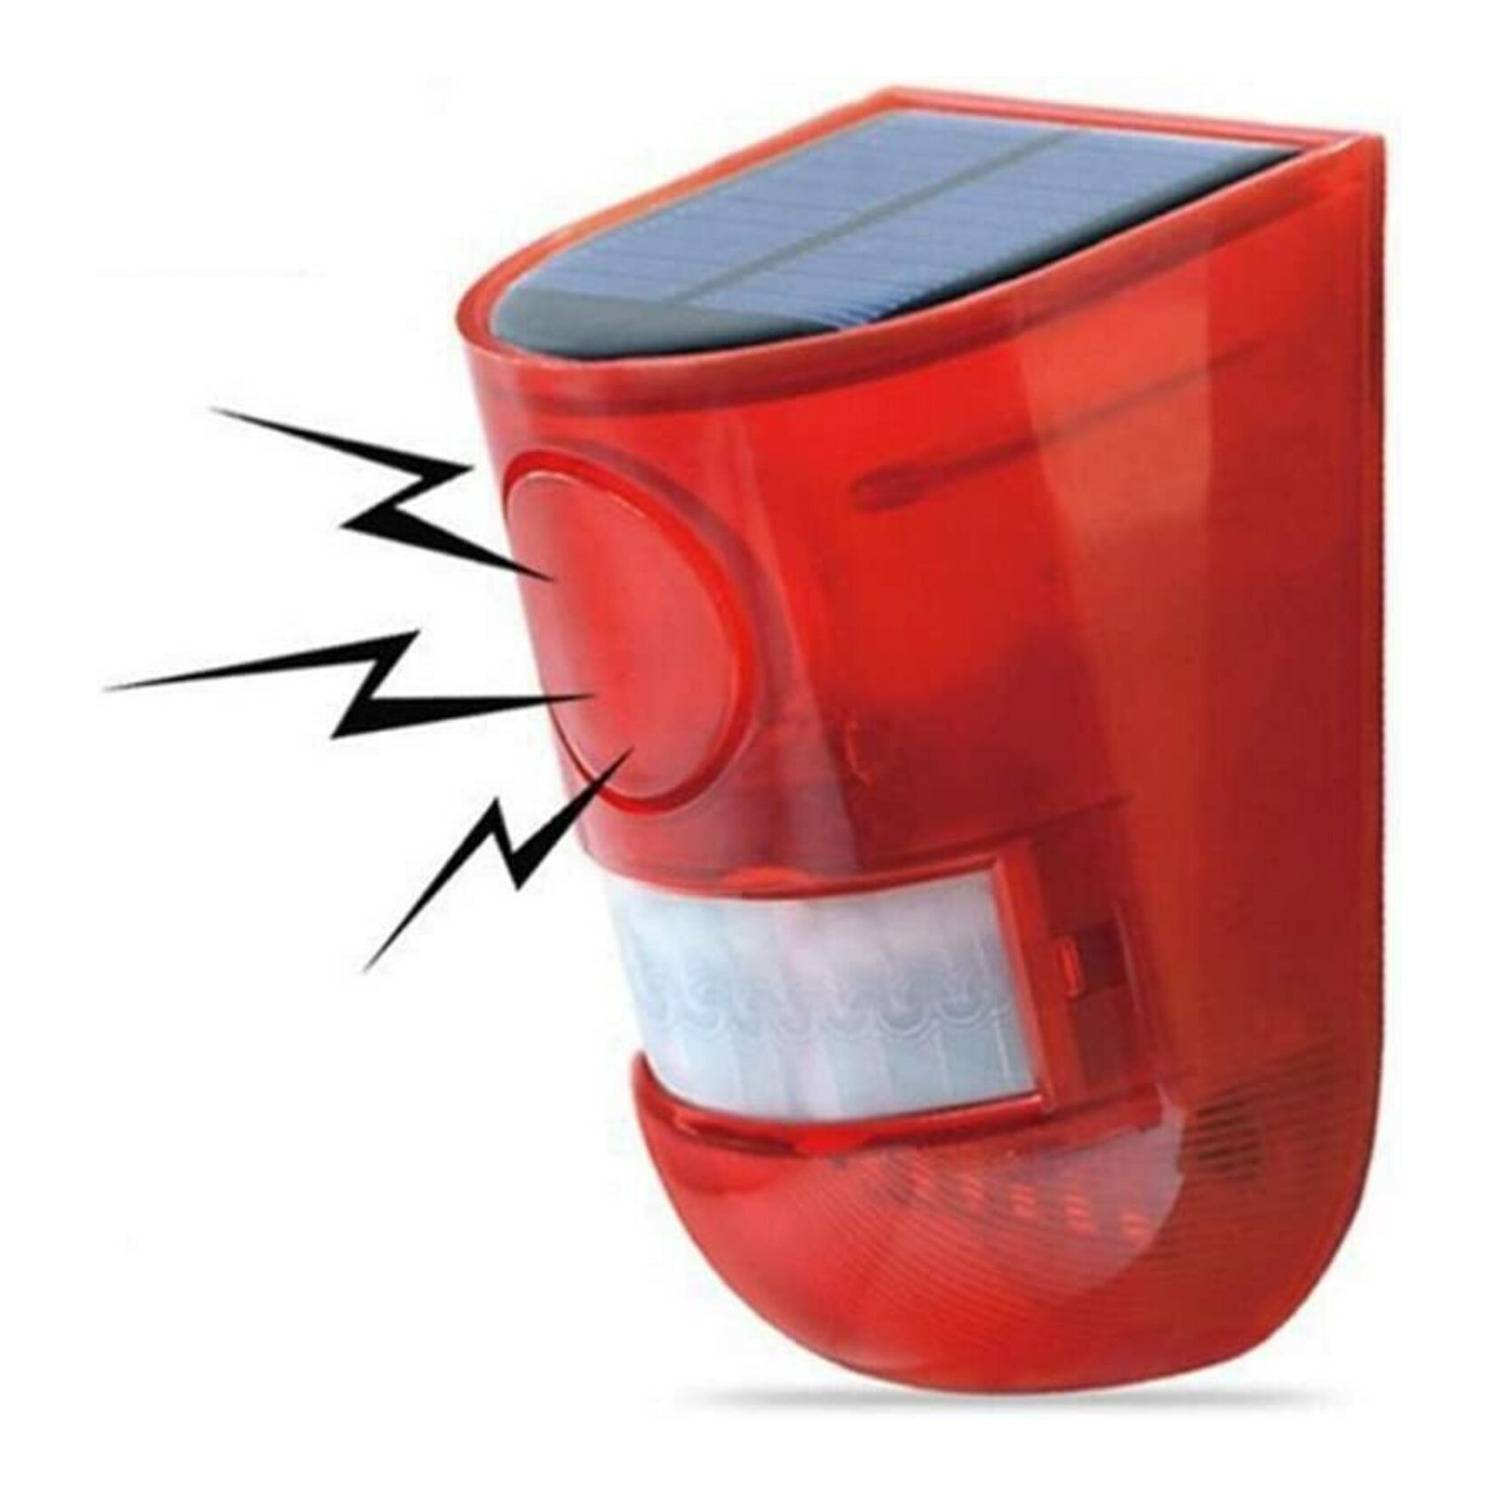 Aolyty Solar Waterproof, Outdoor Motion Sensor Detector Siren Sound Alarm (Red Lampshade)